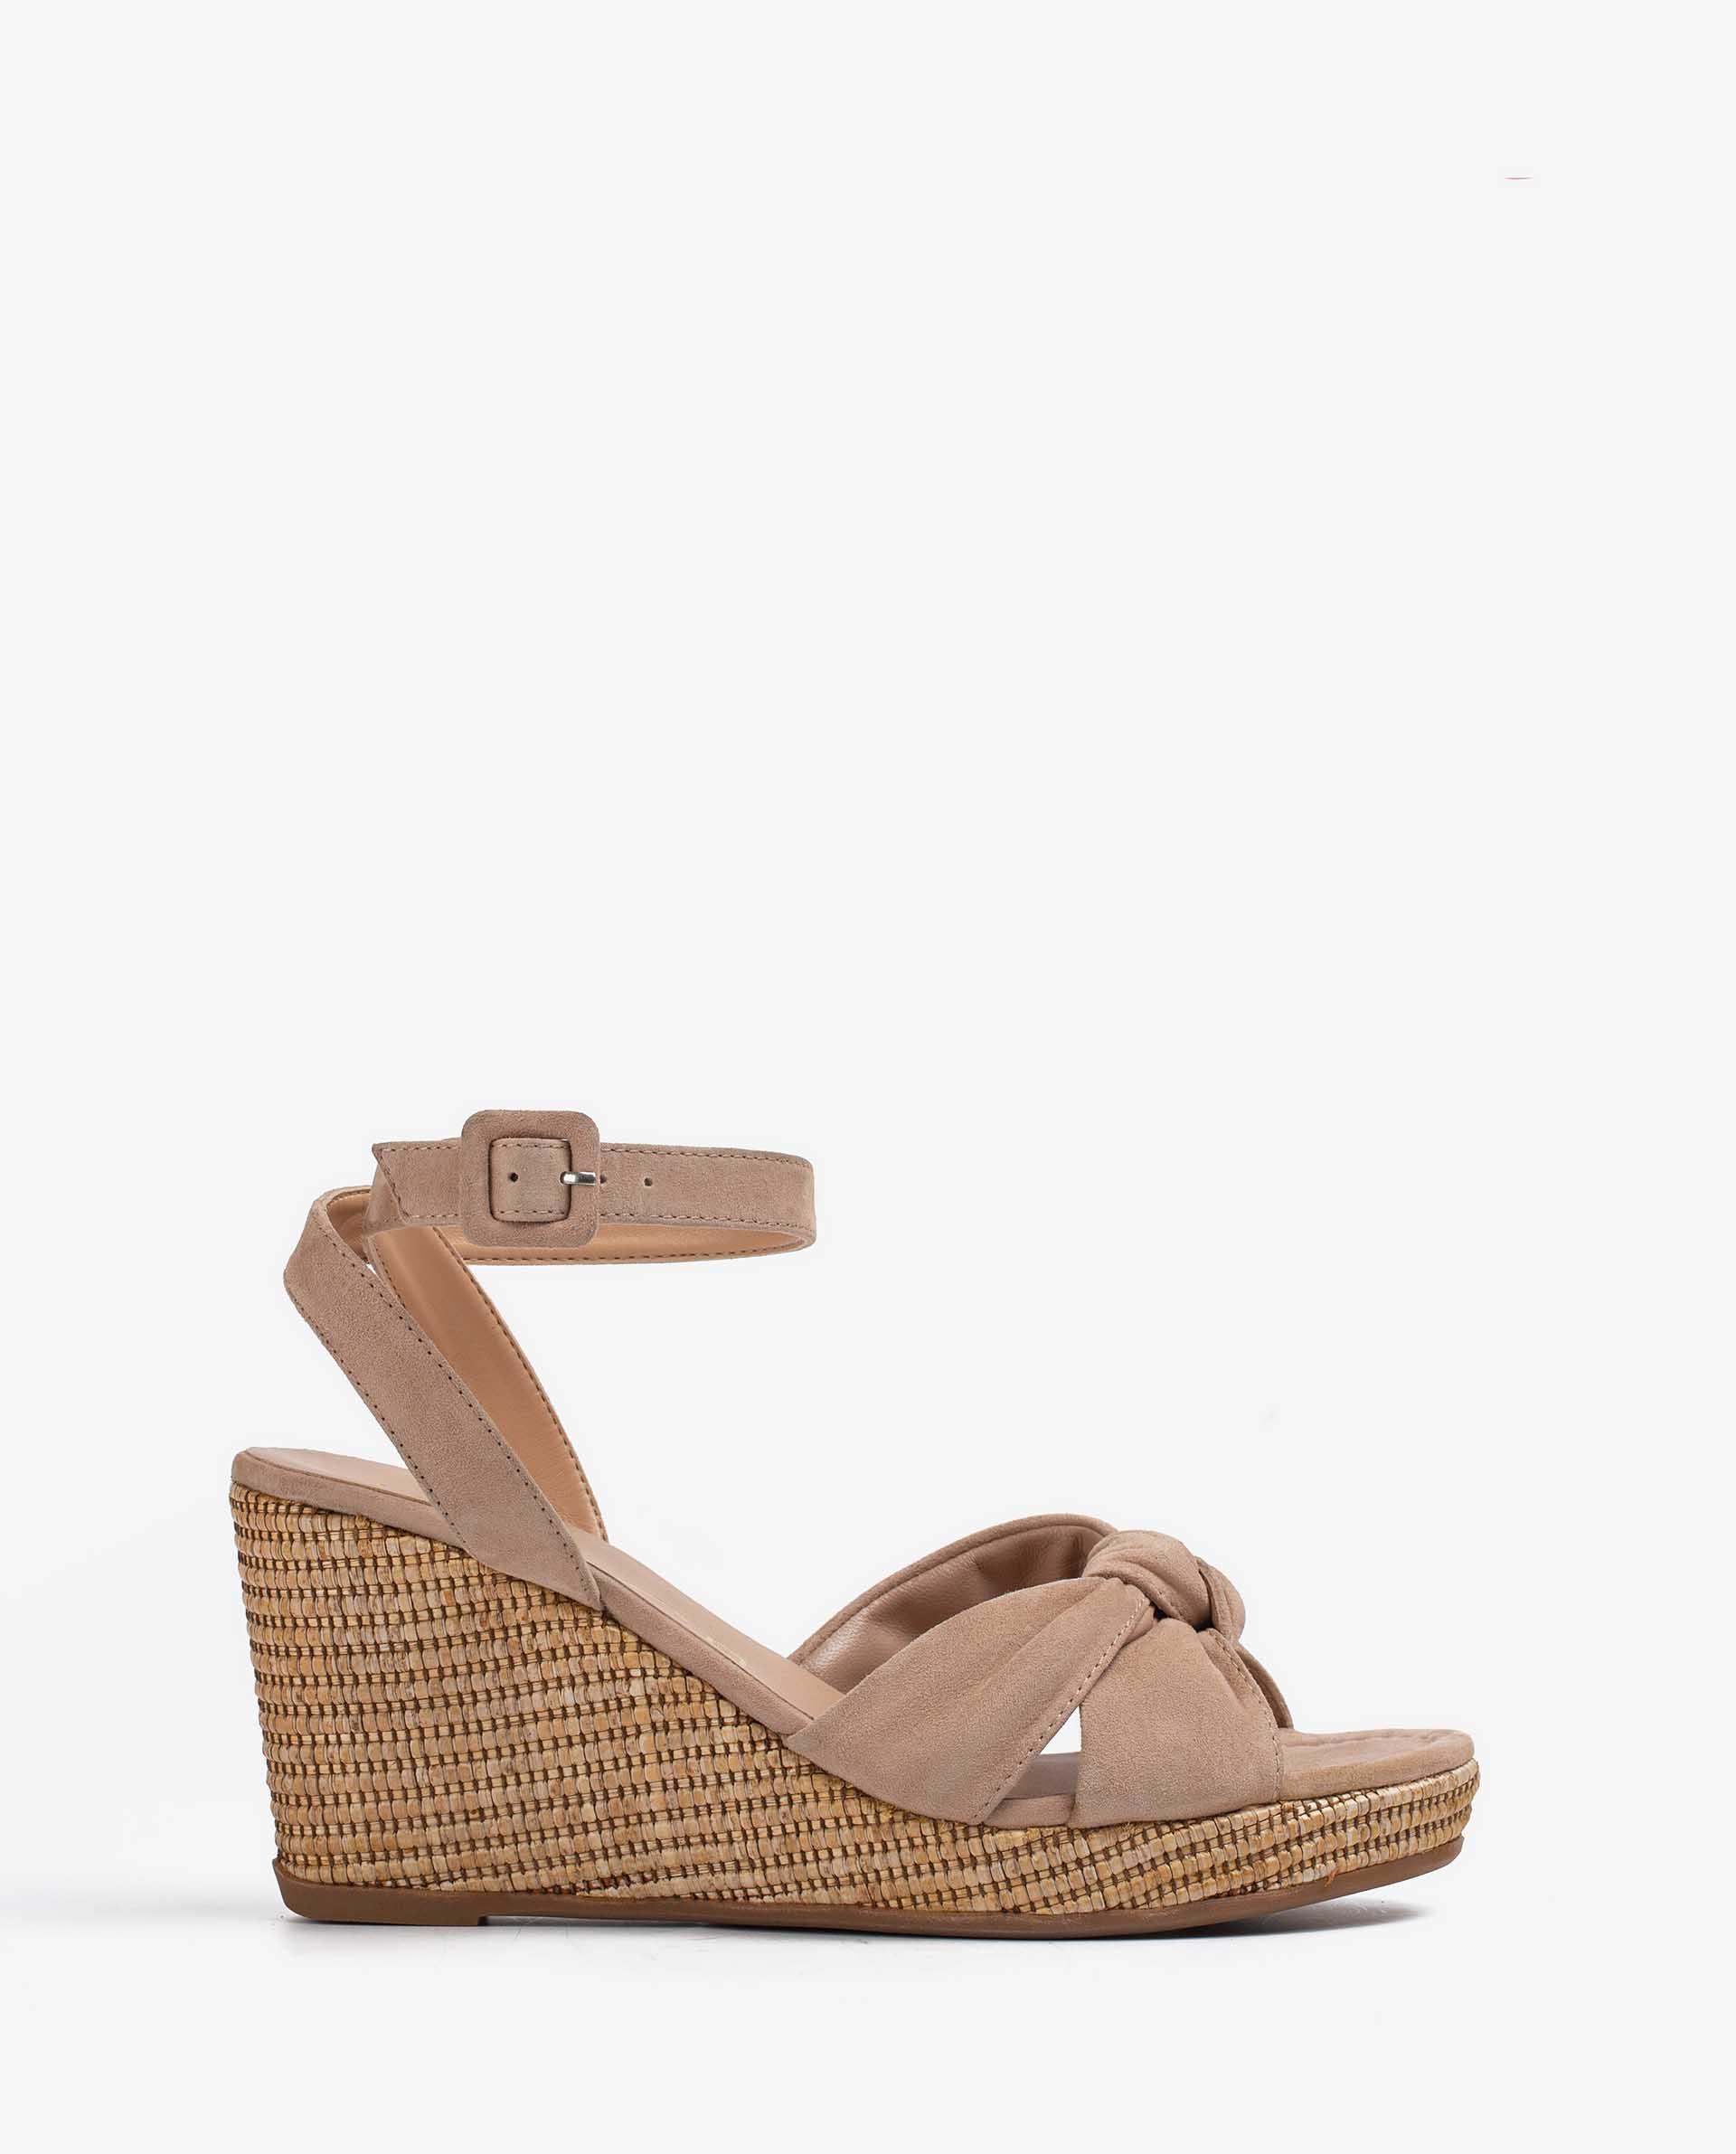 UNISA Kid suede sandals with straps tied up in a knot LAZKAO_KS 2